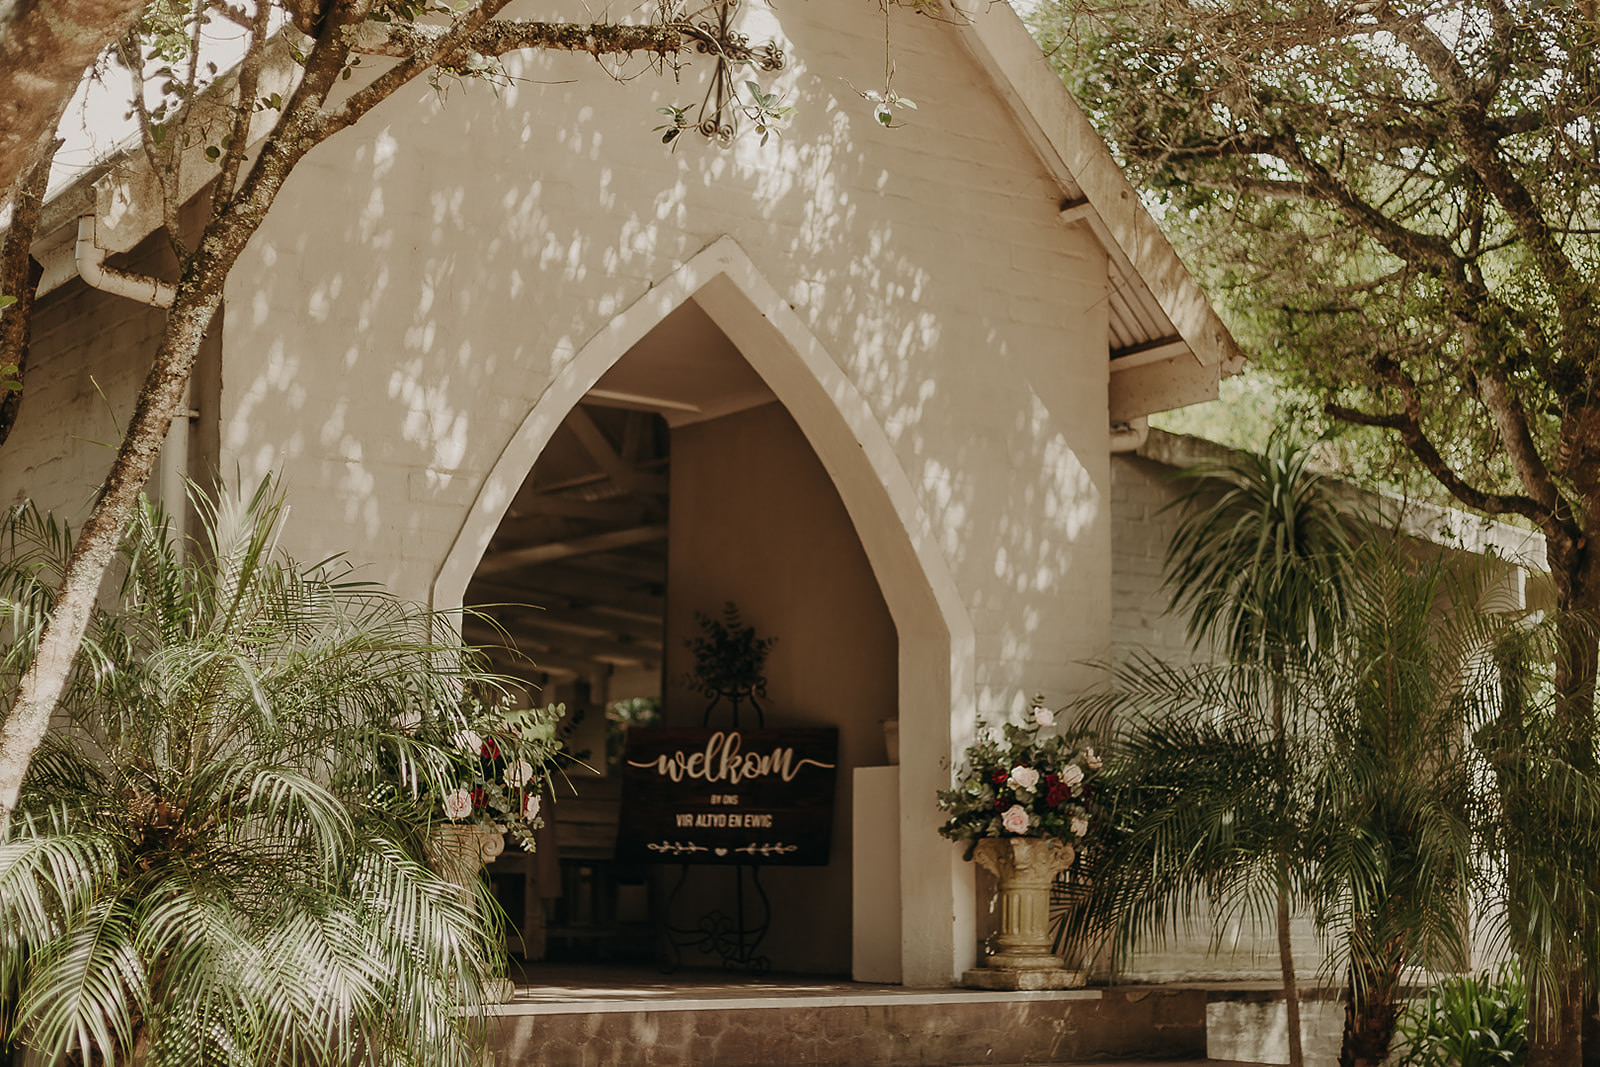 The chapel at the Plantation where the couple got married